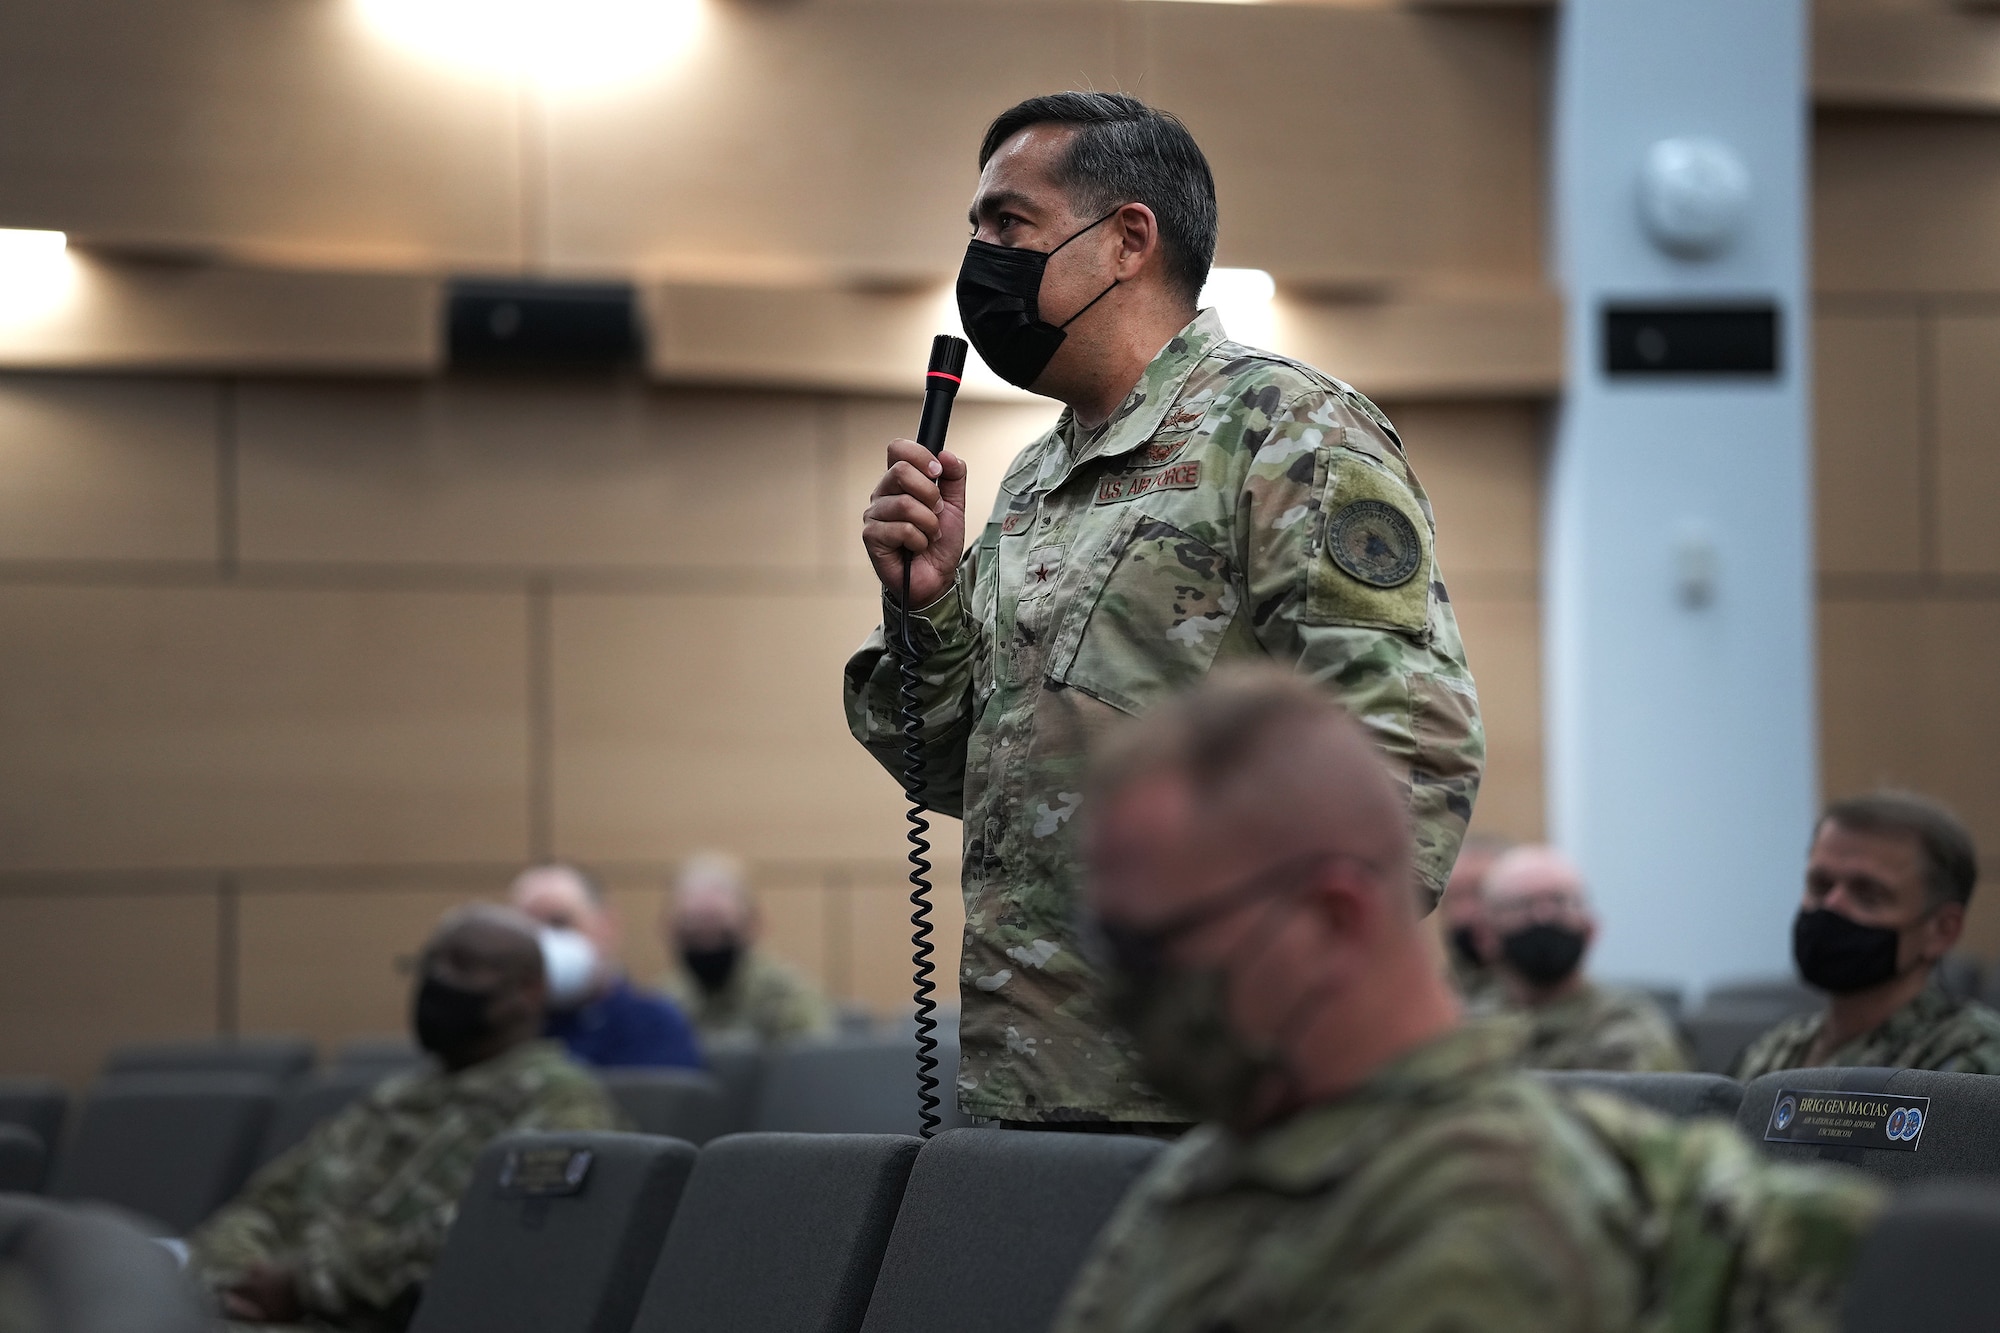 Brig. Gen. Vic Macias, U.S. Cyber Command, Cyber National Mission Force deputy commander,  poses a question during the 10th annual Reserve Component Summit at Fort George G. Meade, Md., Aug. 20, 2021.